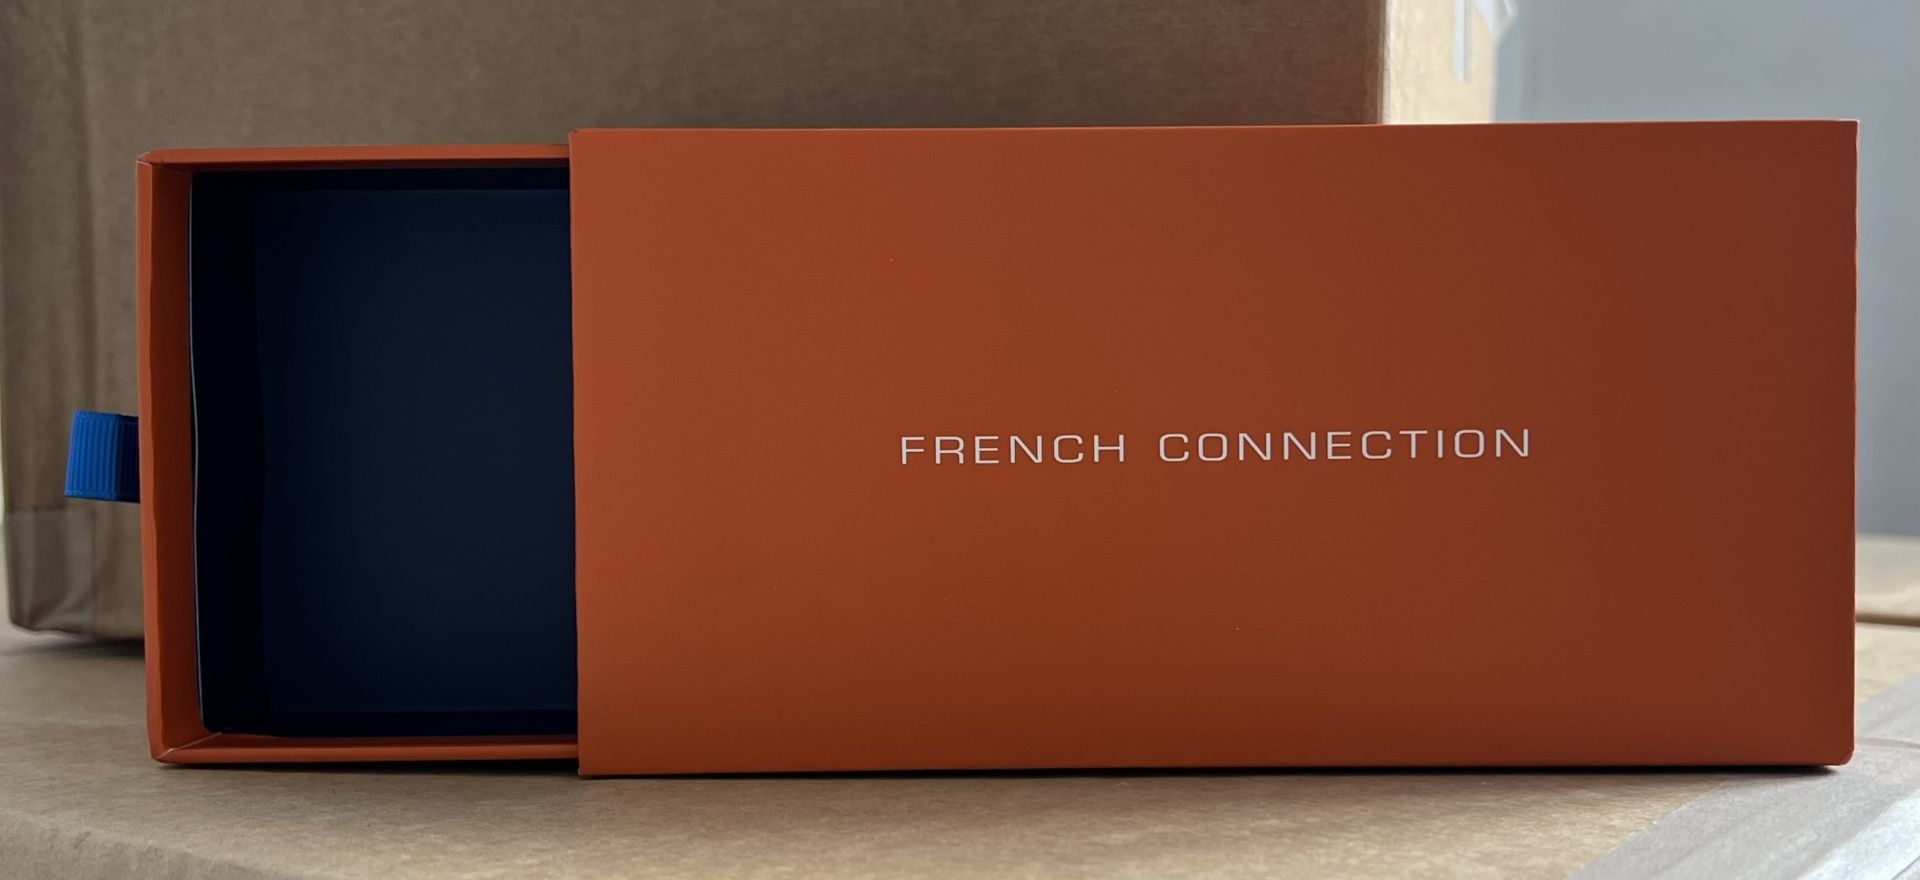 88 x French Connection Glasses / Sunglasses Orange Boxes - (NEW) - SELL FOR £440+ !